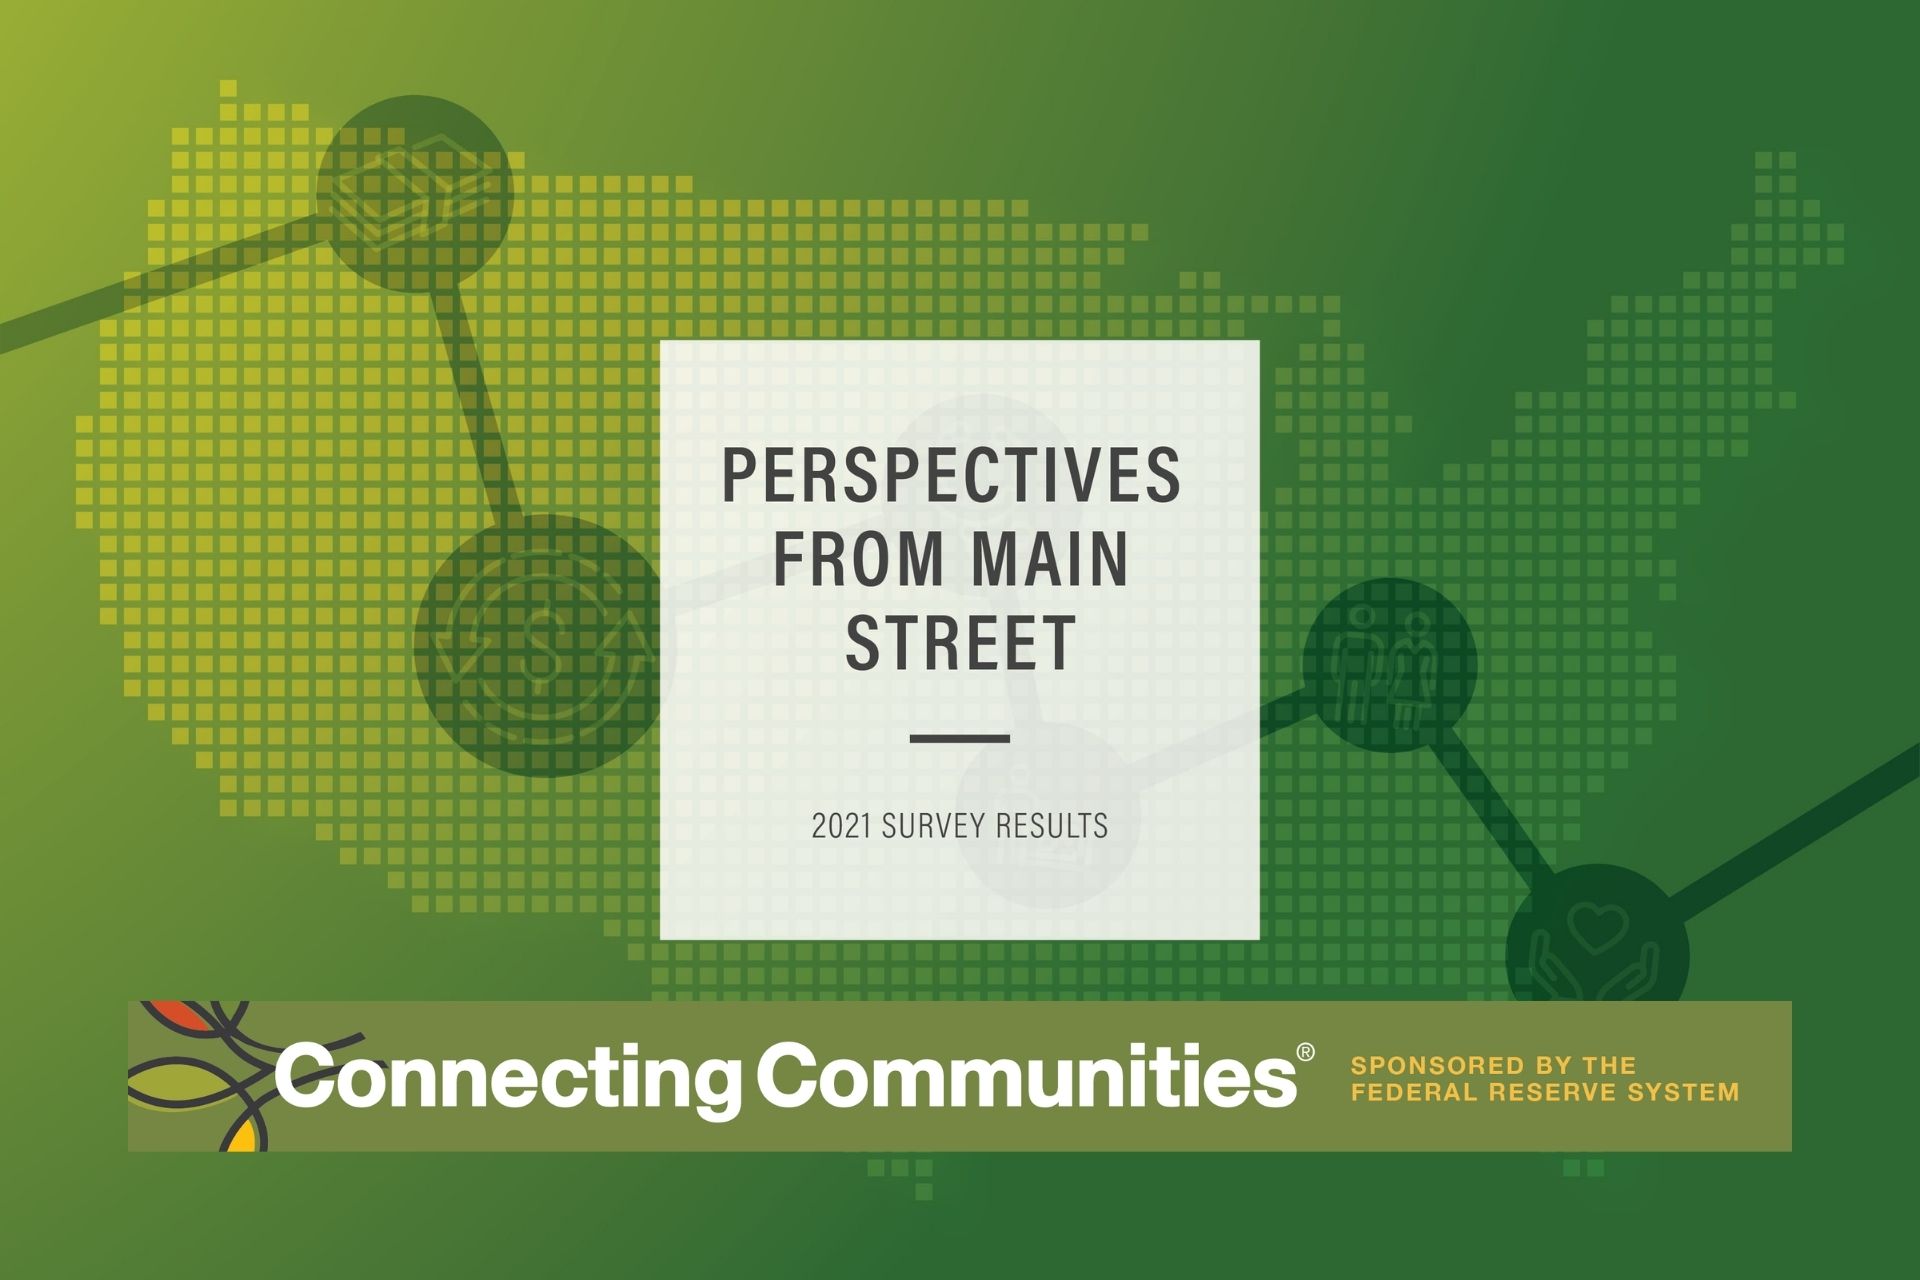 Connecting Communities: Perspectives from Main Street 2021